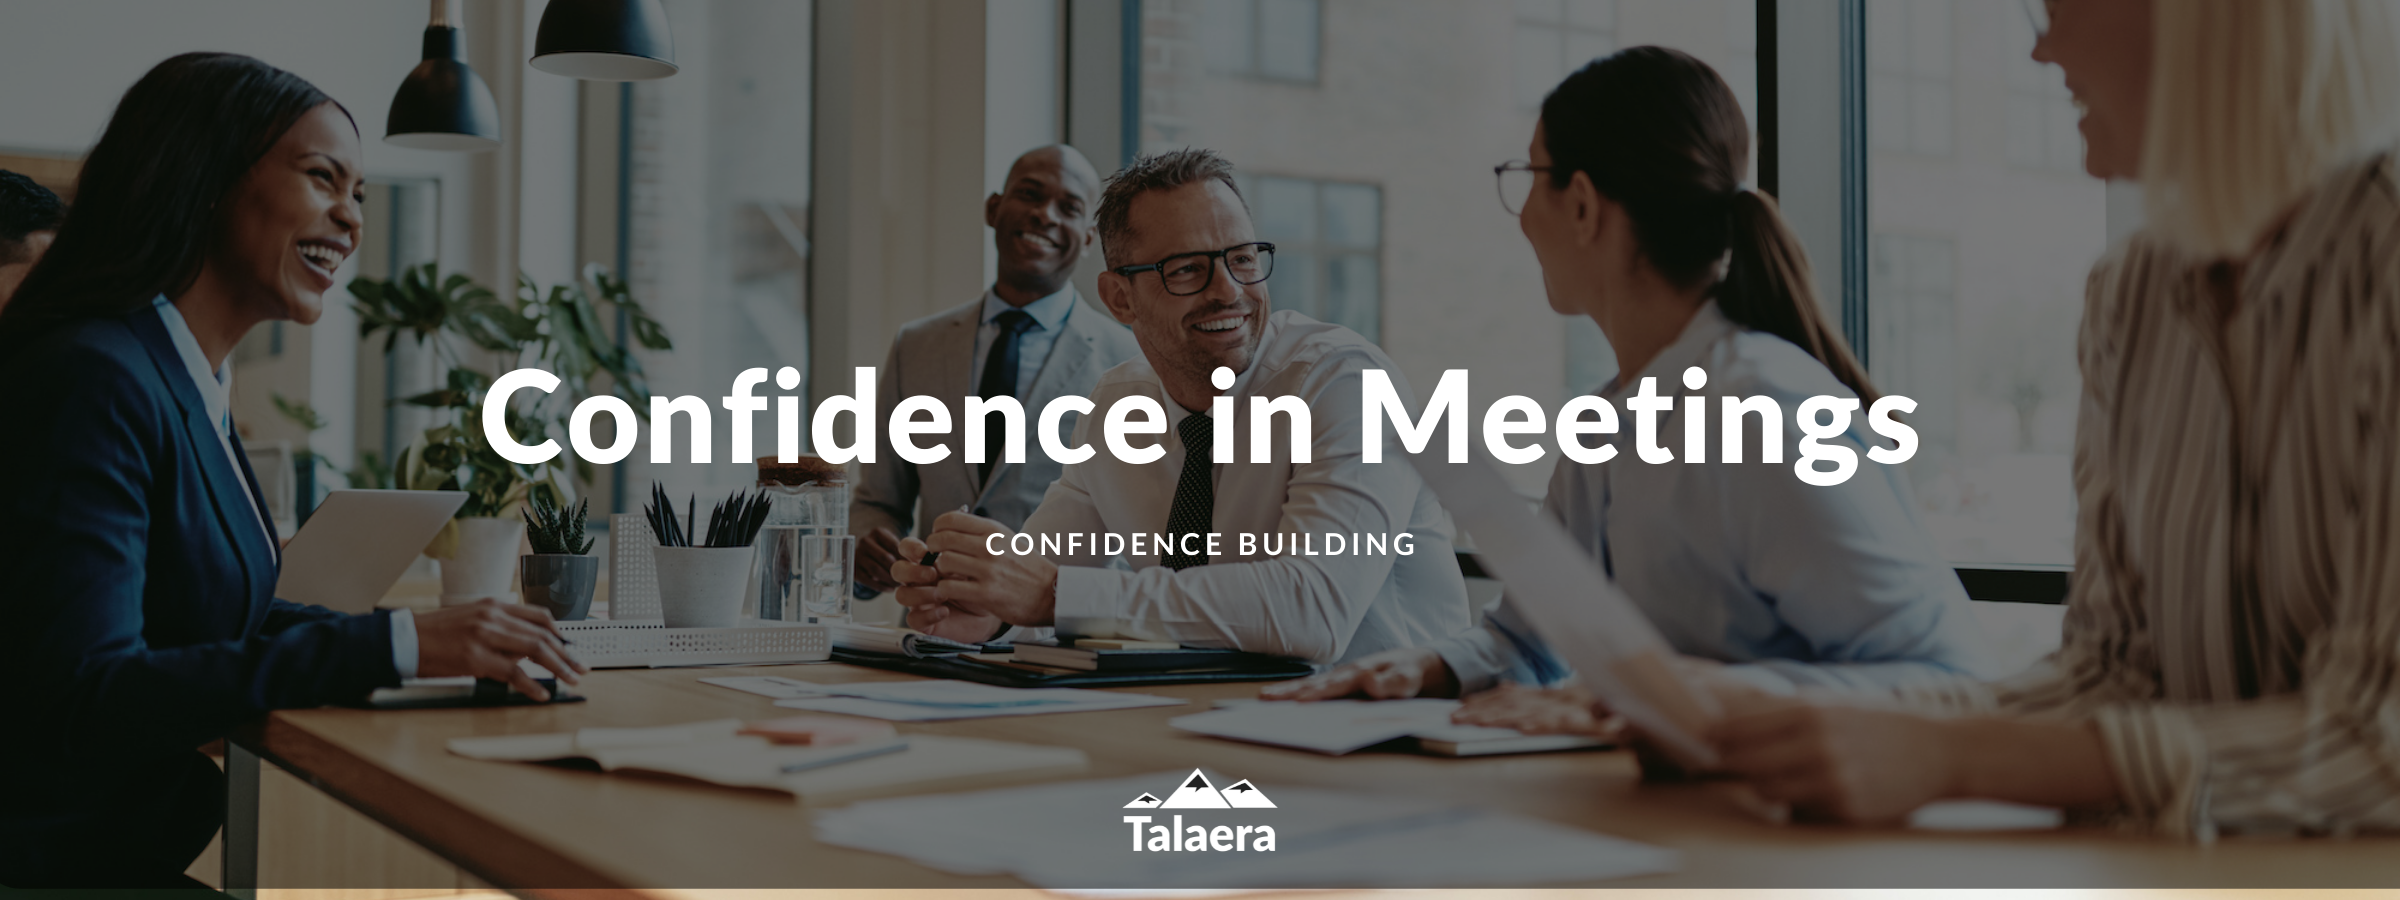 Express Yourself Confidently in Meetings Talaera